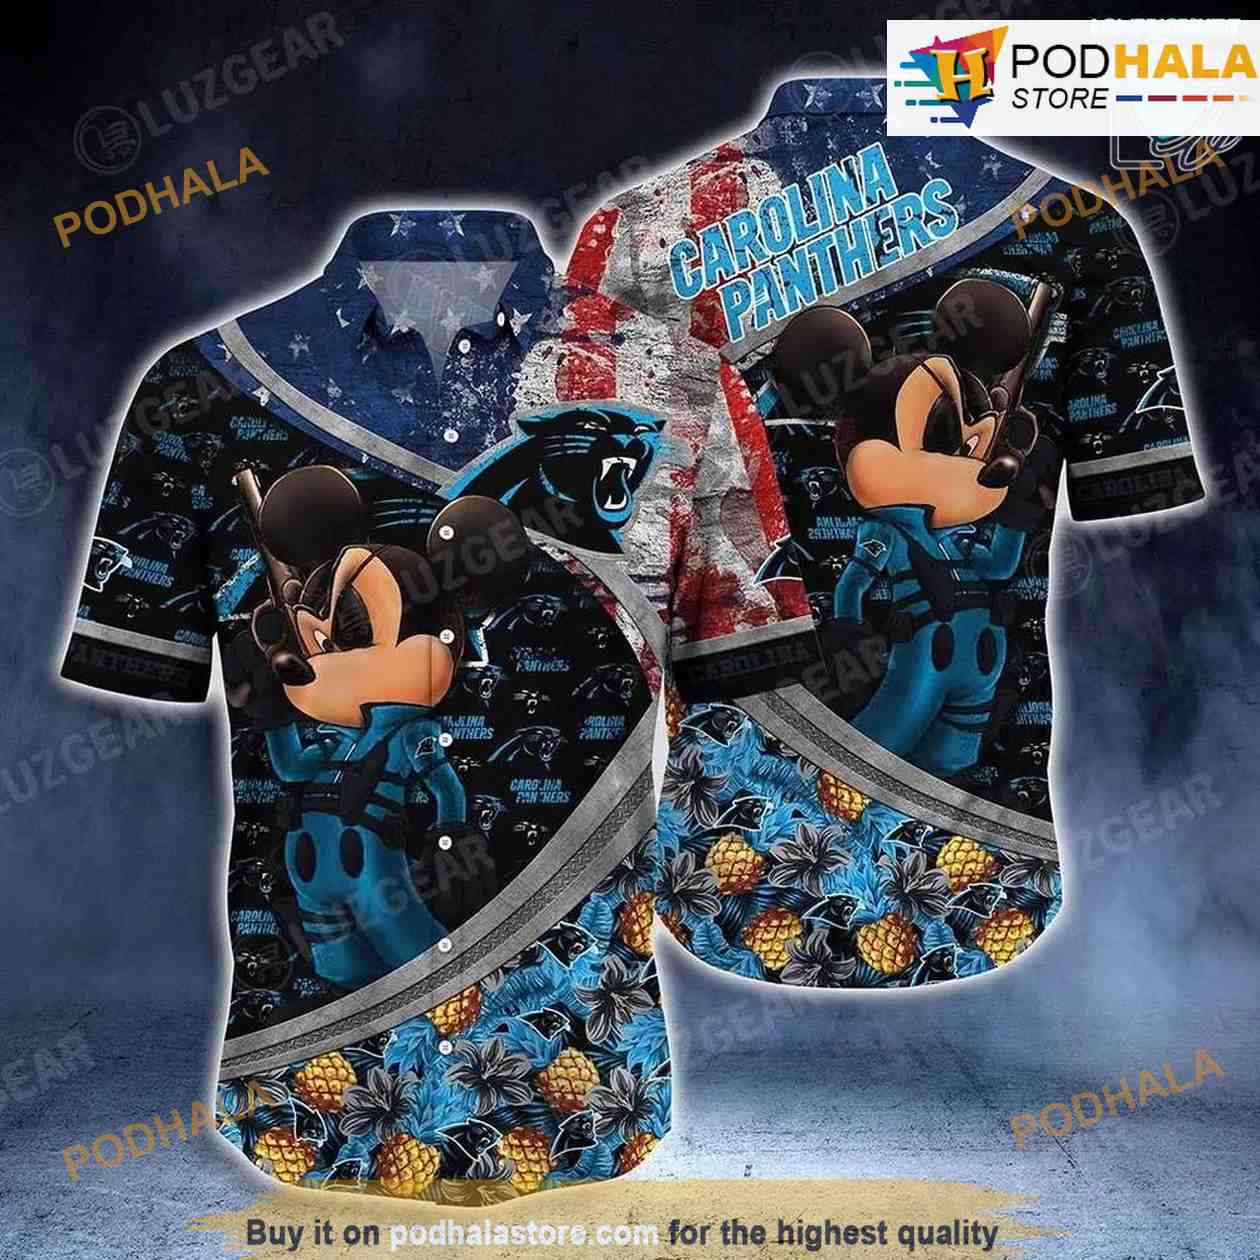 Personalized New York Giants NFL Summer Mickey Hawaiian Shirt - Bring Your  Ideas, Thoughts And Imaginations Into Reality Today